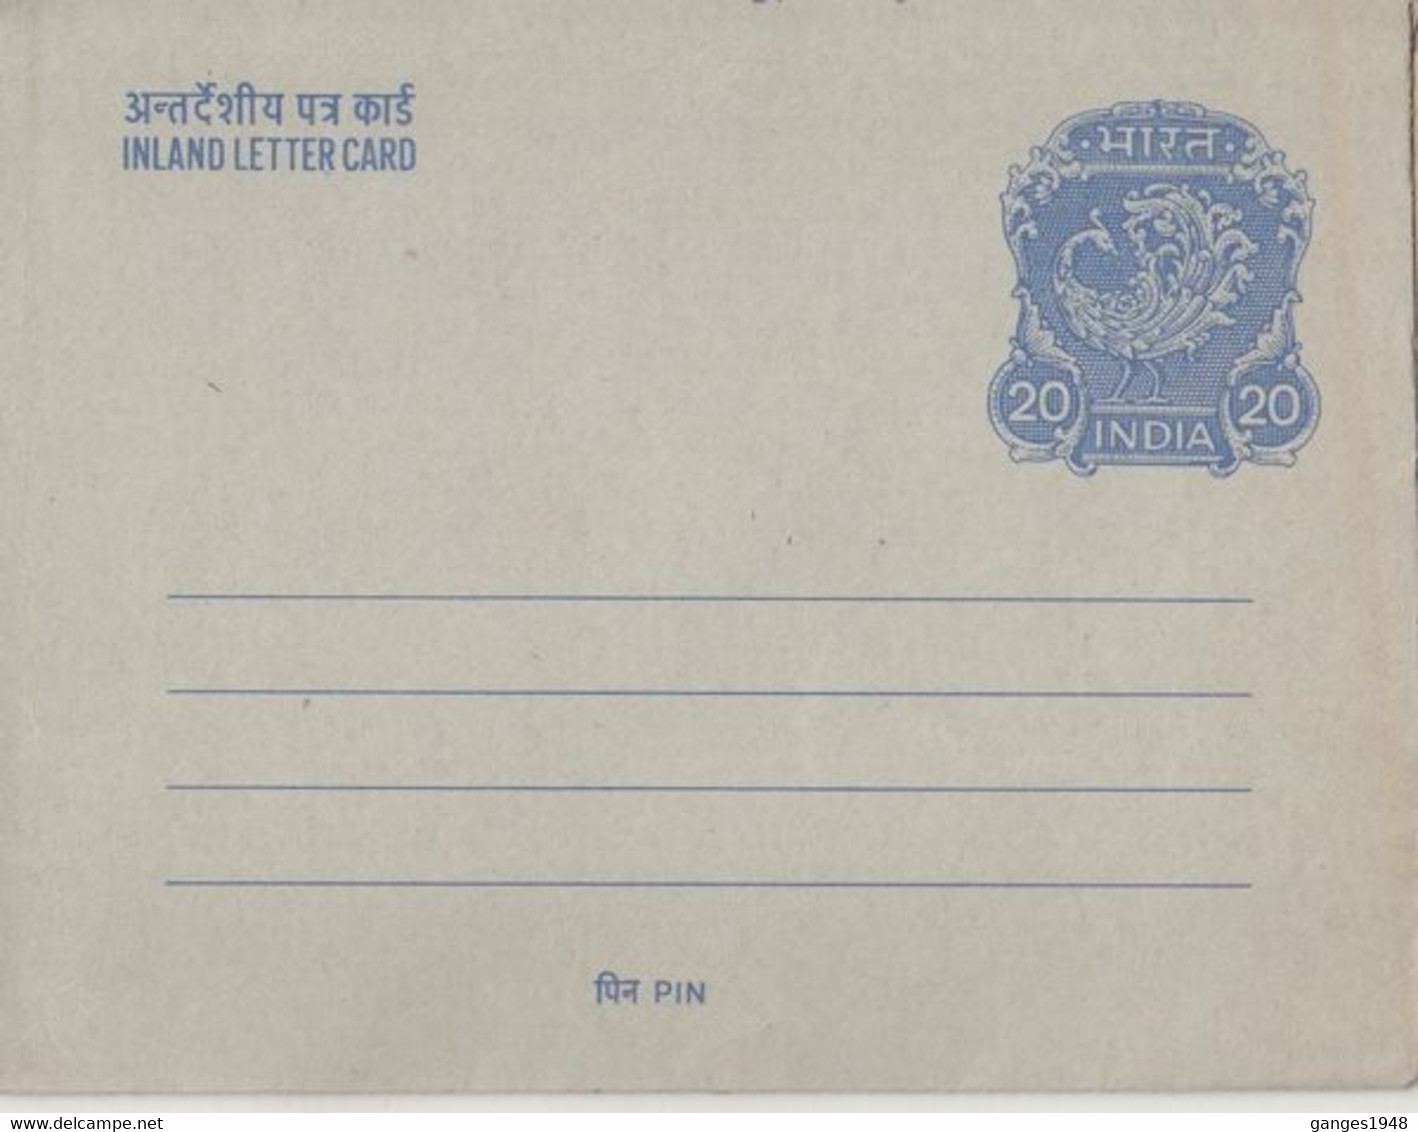 India  1970's    20P  Inland Letter  #  74246  Inde Indien - Inland Letter Cards